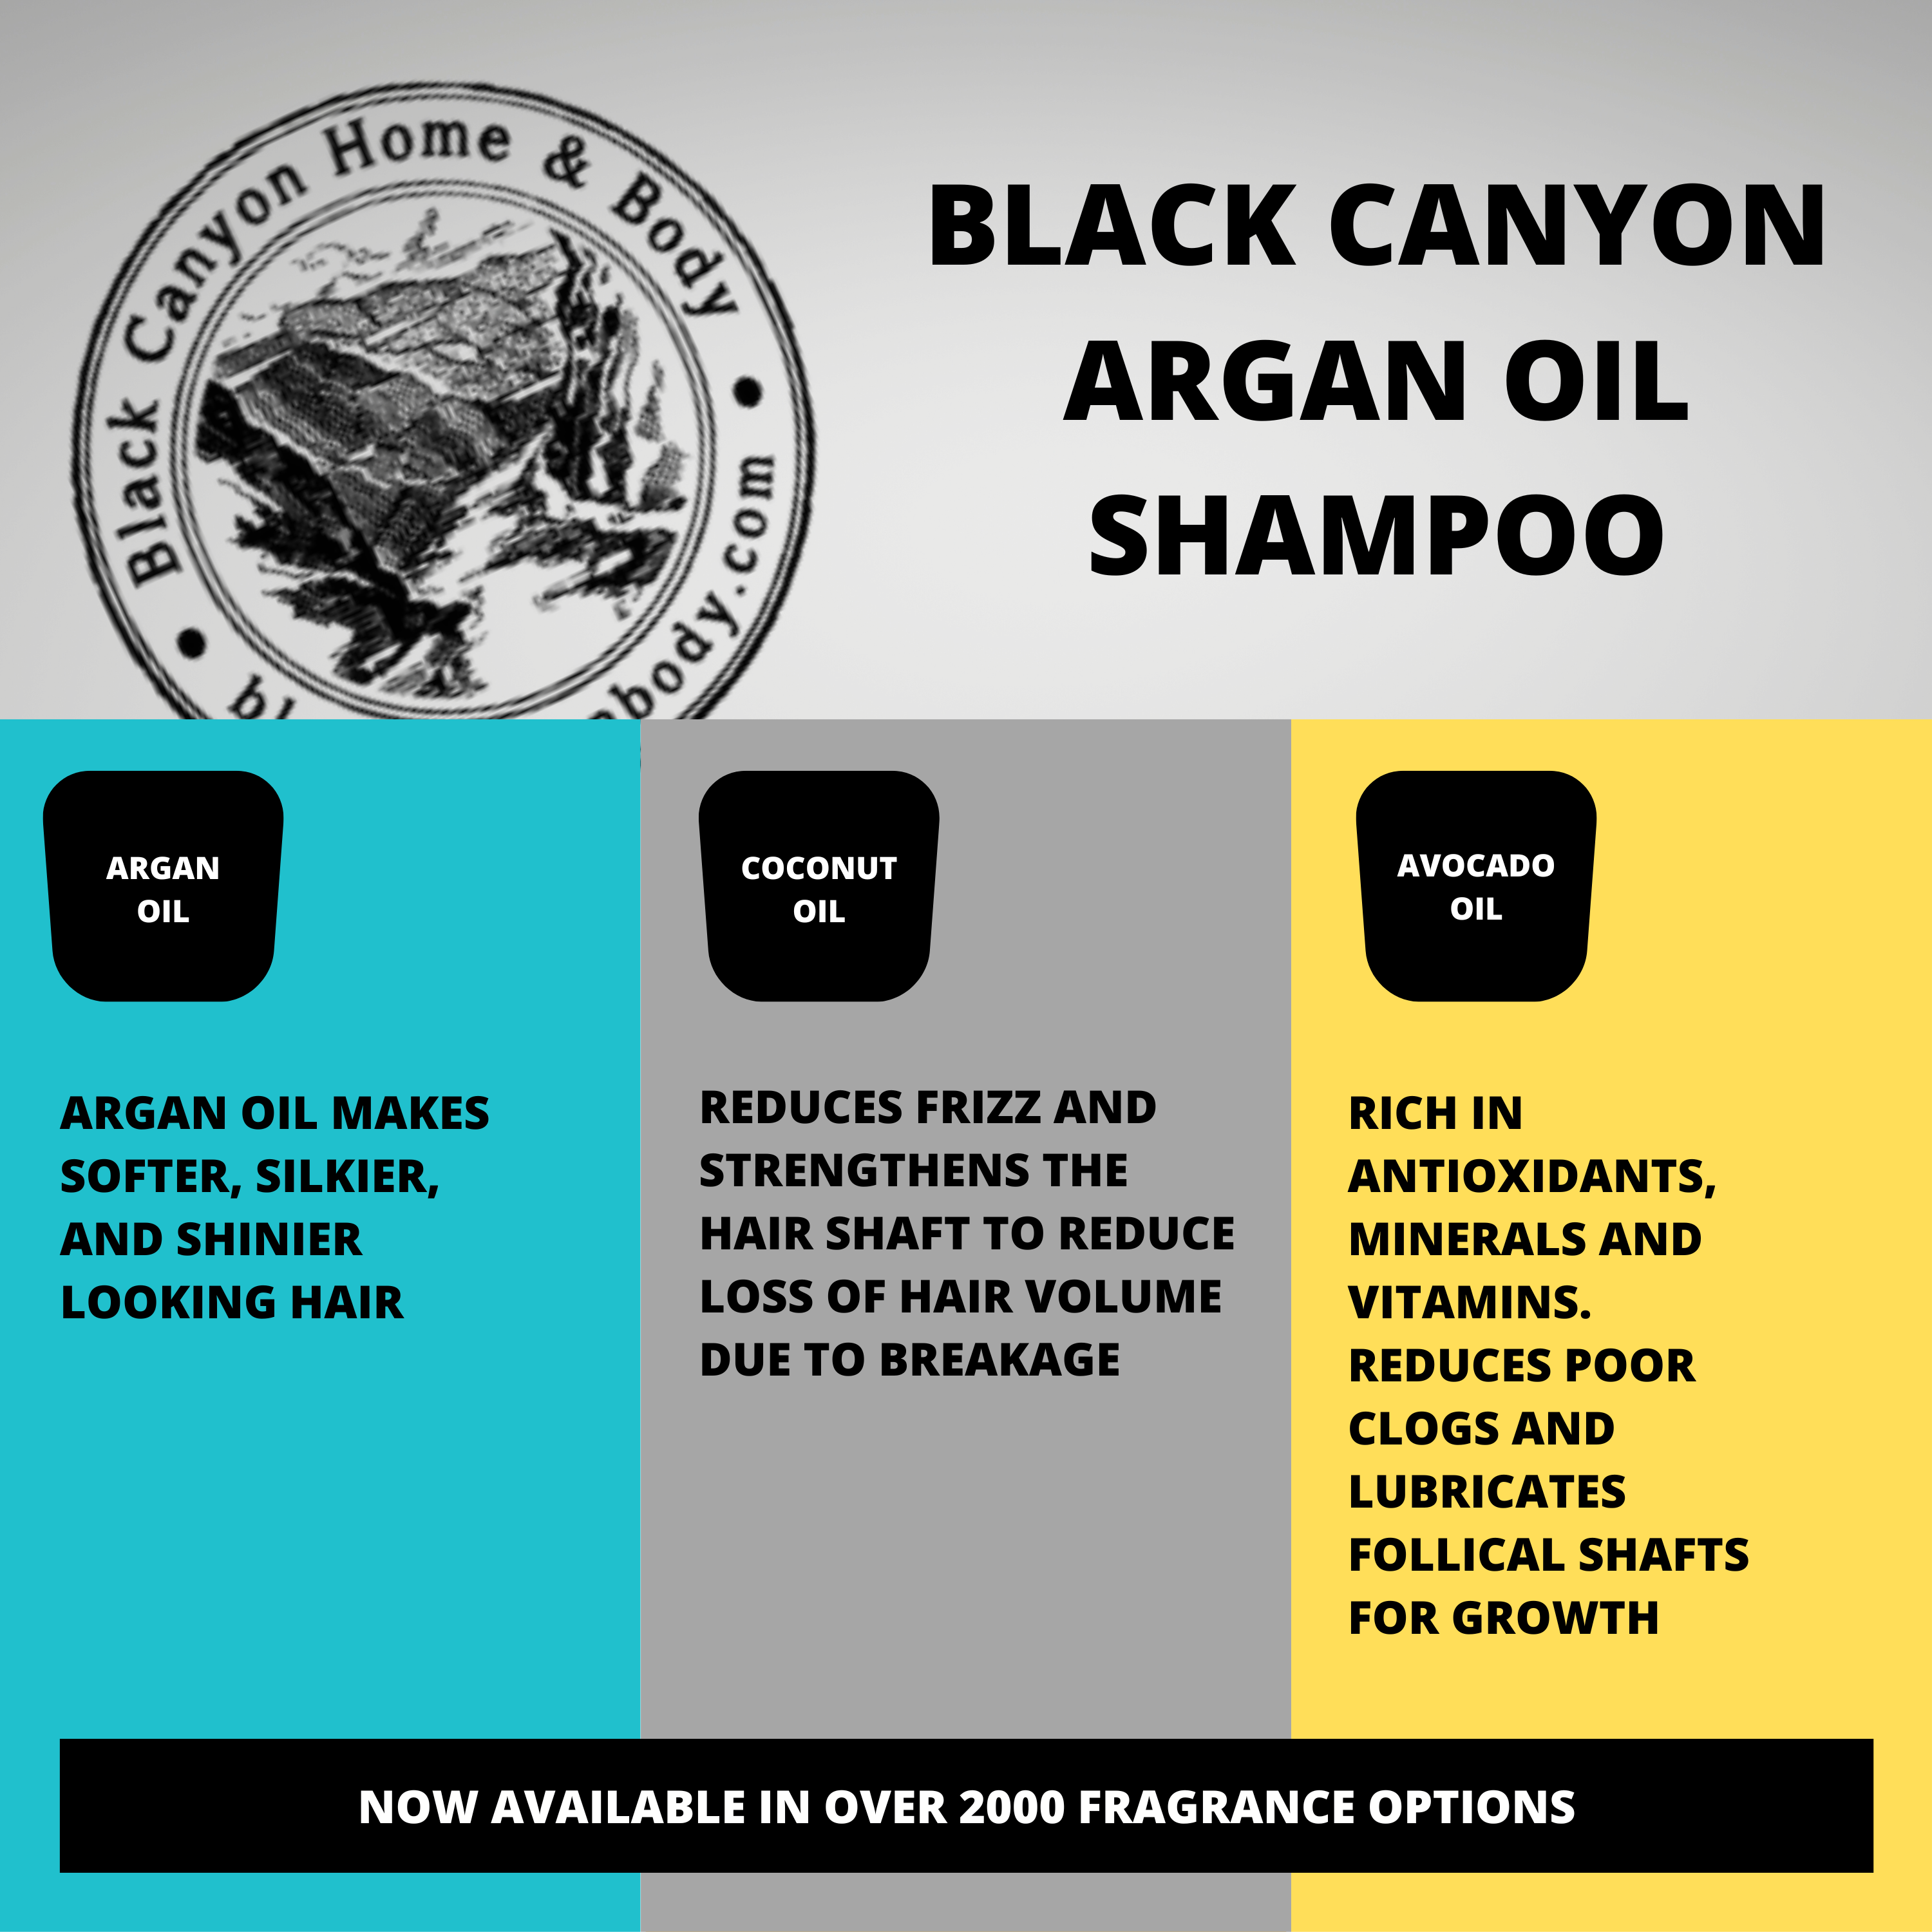 Black Canyon Blood Orange Scented Shampoo with Argan Oil